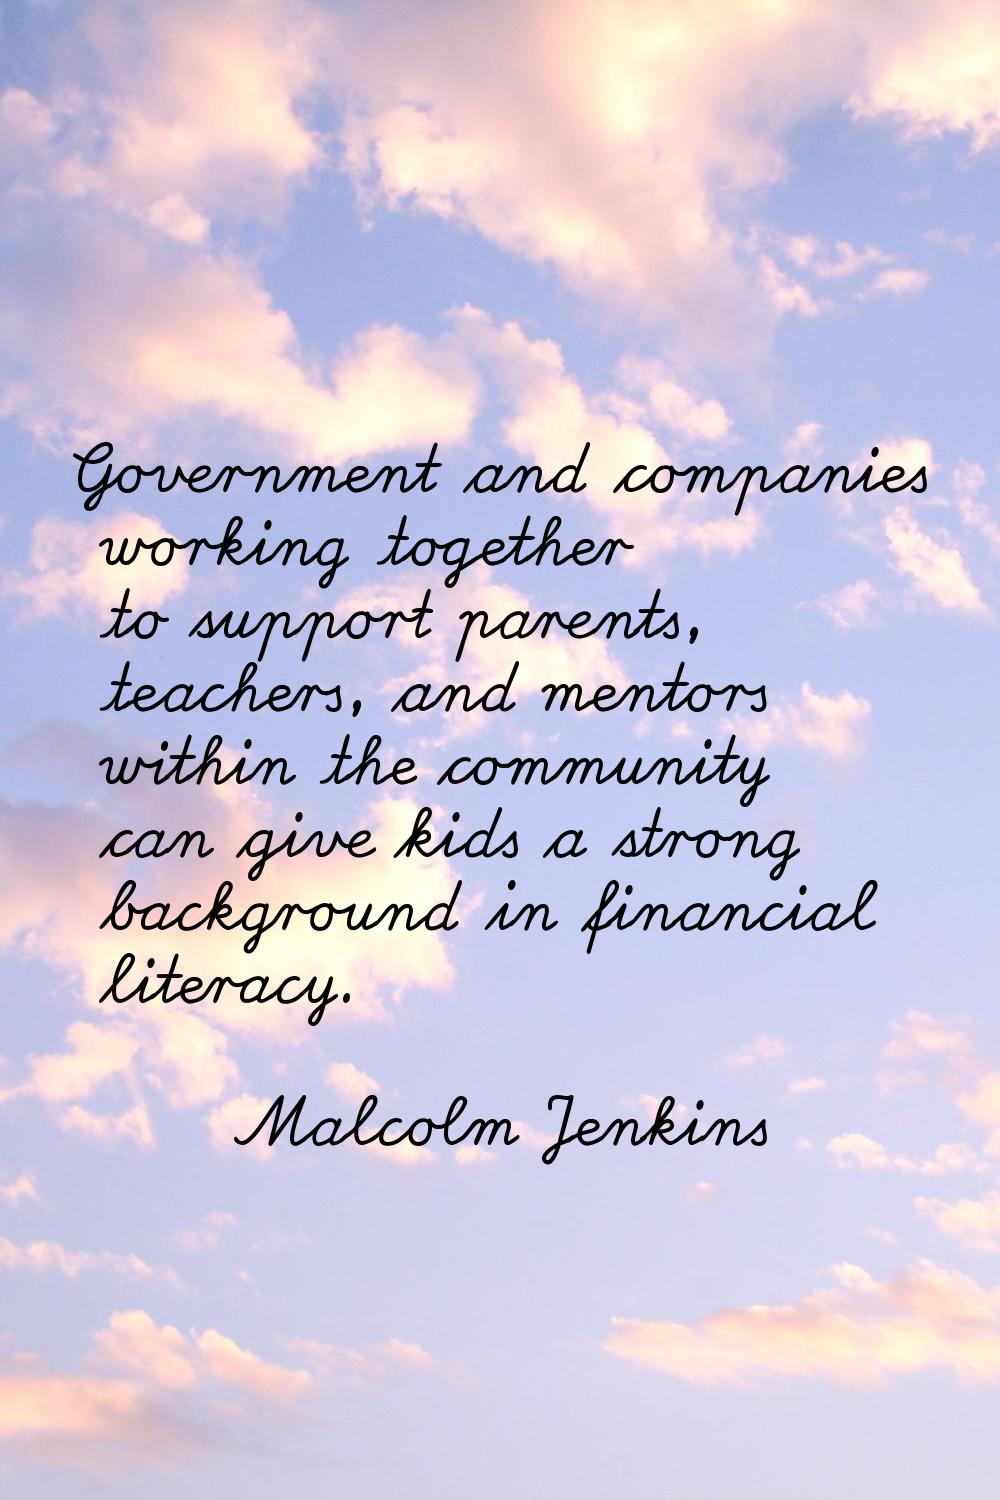 Government and companies working together to support parents, teachers, and mentors within the comm